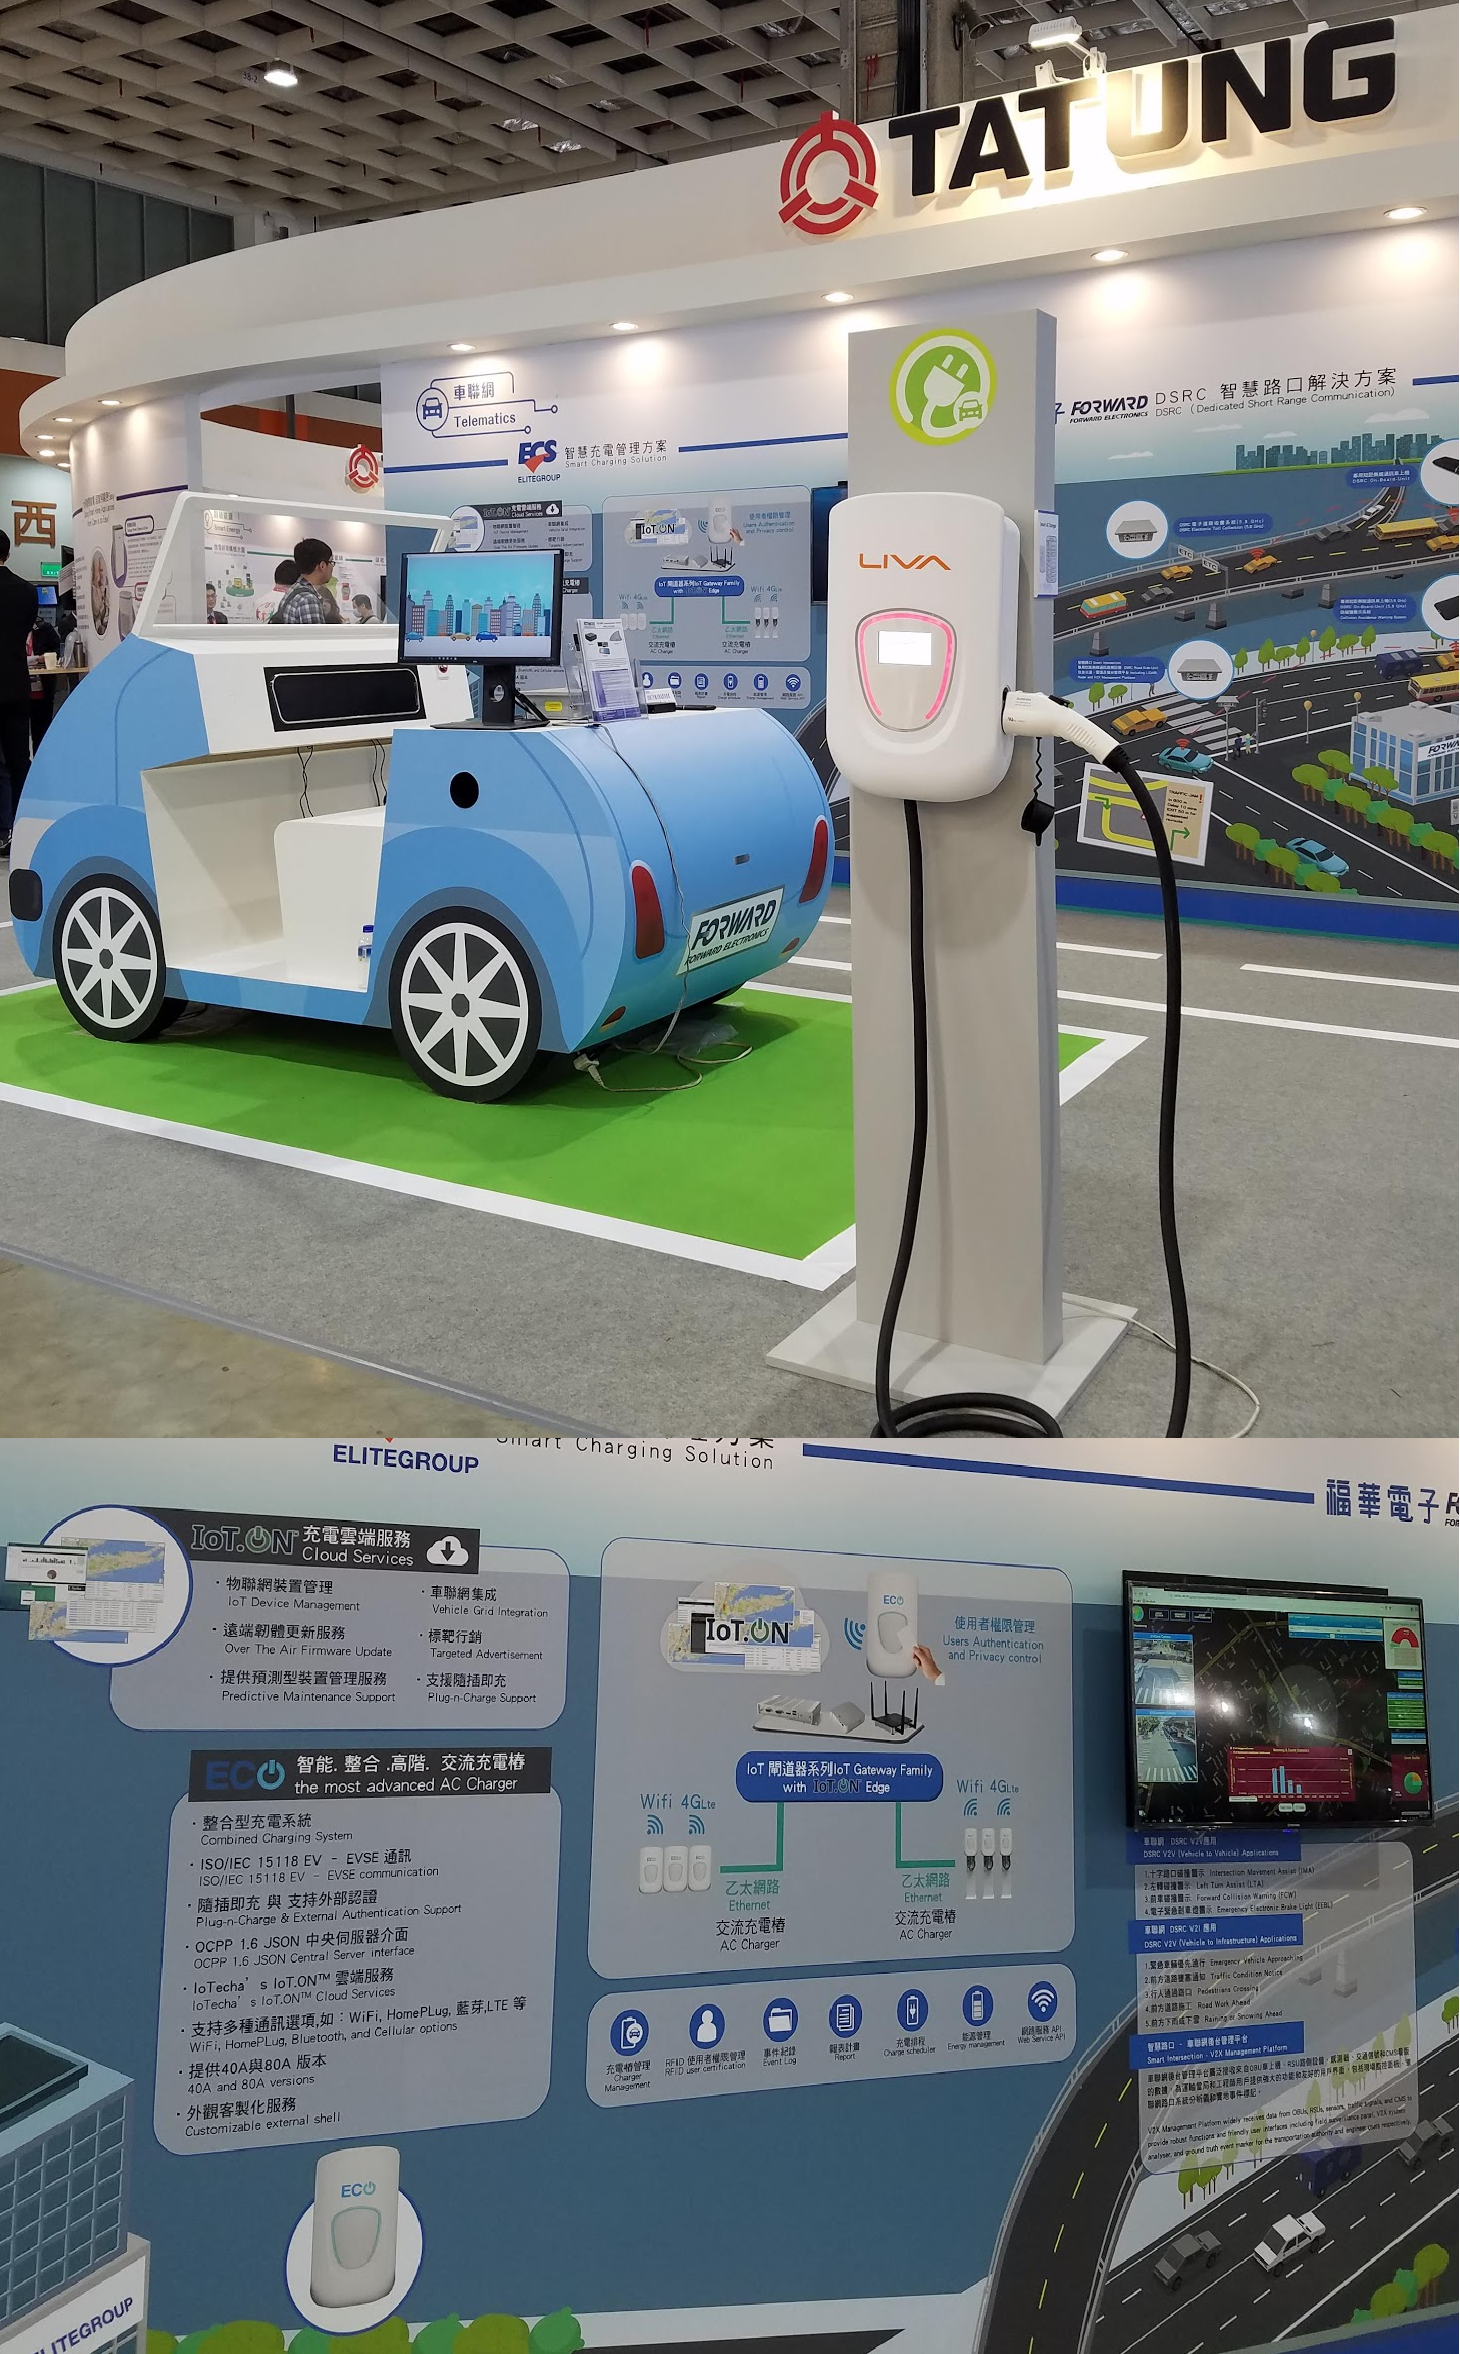 KUDOS TO THE #ELITEGROUP TEAM FOR THE SMART LIVA AC EV CHARGER AND IOT.ON™ PAAS DEMO AT THE SMART CITY EXPO 2019 IN TAIPEI!